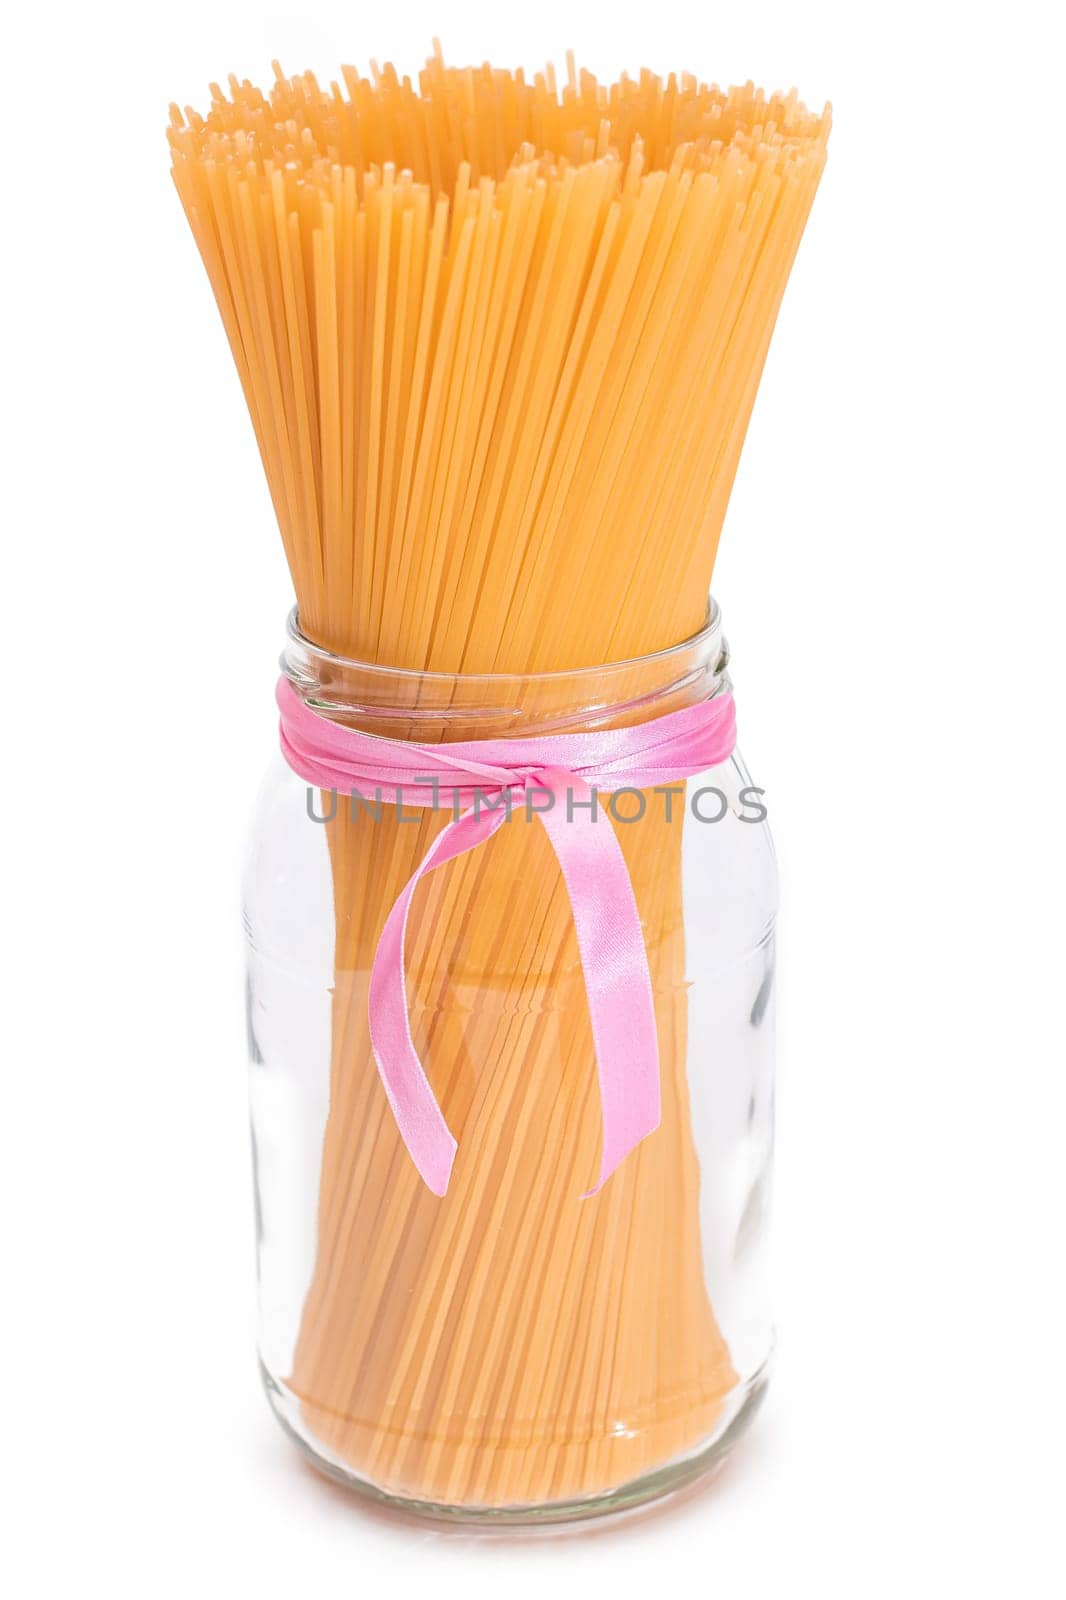 Dry Uncooked Spaghetti in a Glass Jar Isolated on White Background by InfinitumProdux